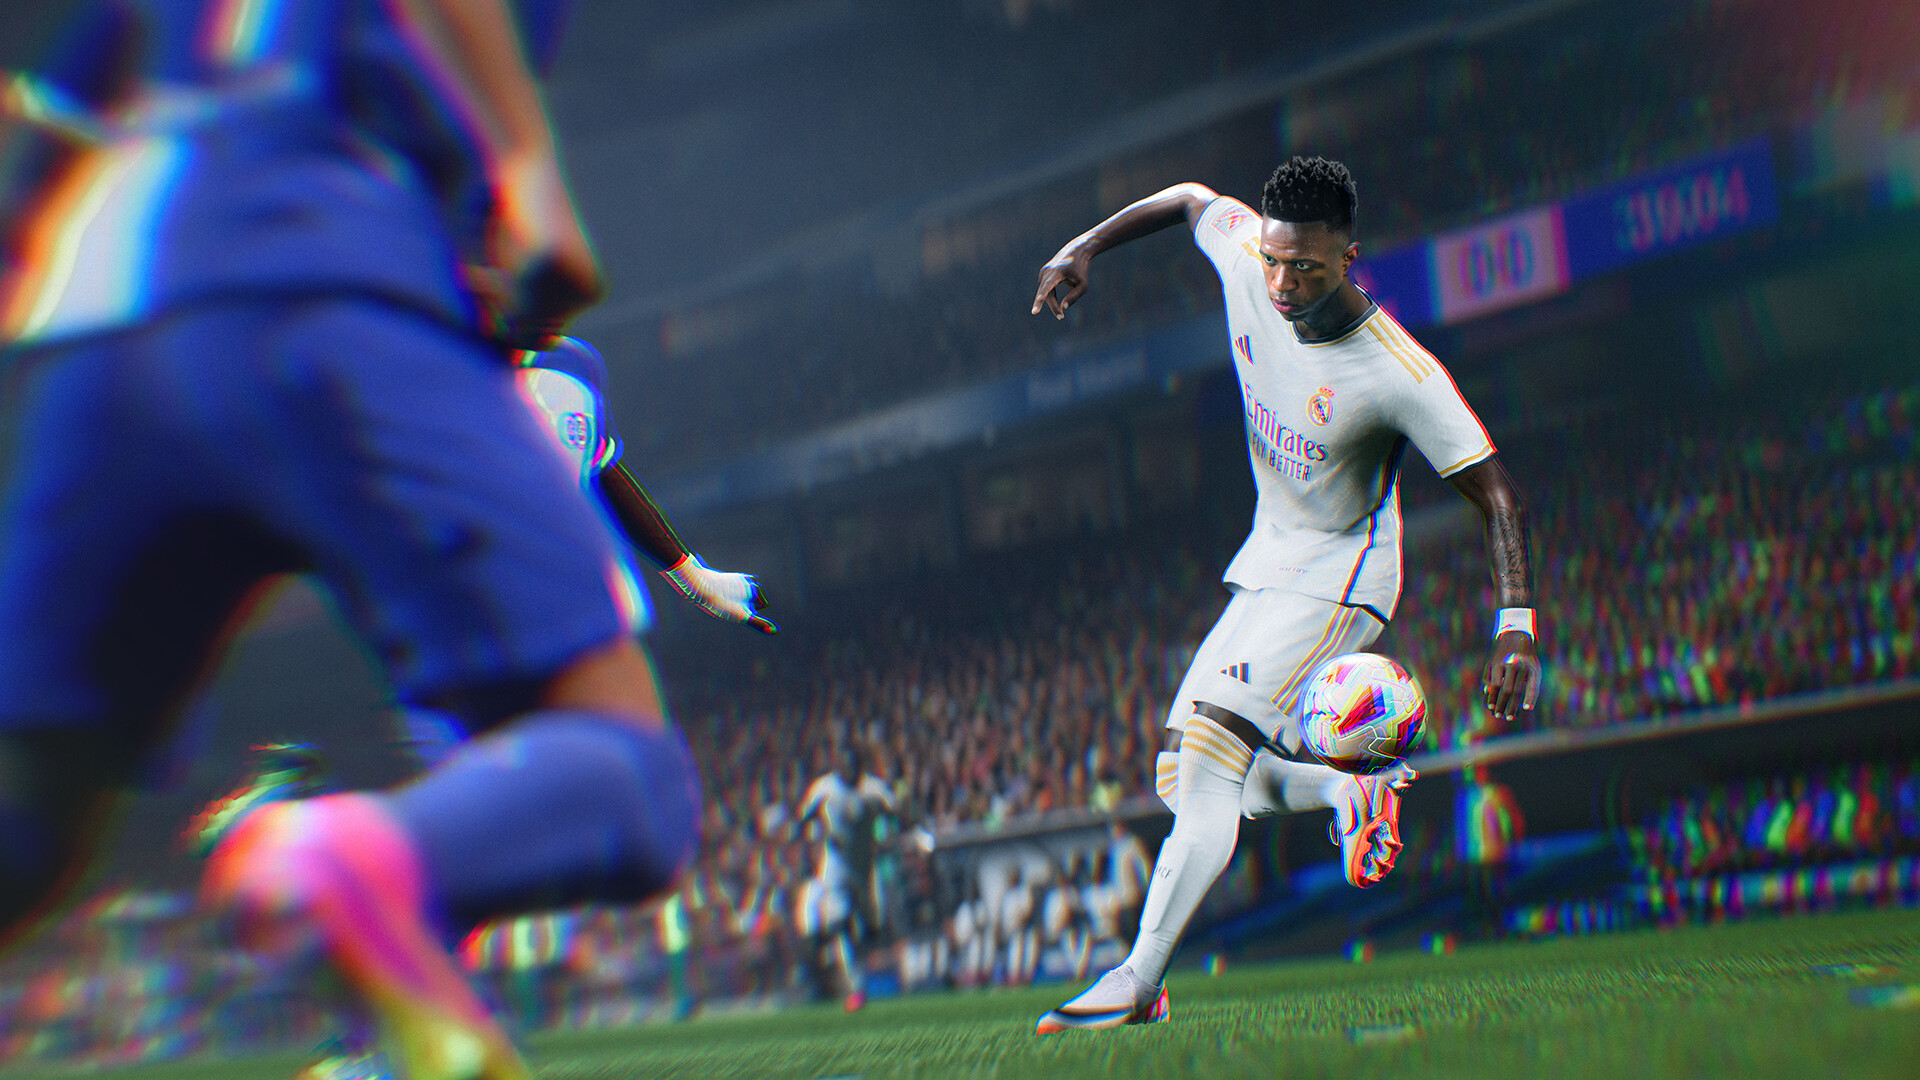 EA FC 24 pre-download on PC: Download size, all available options